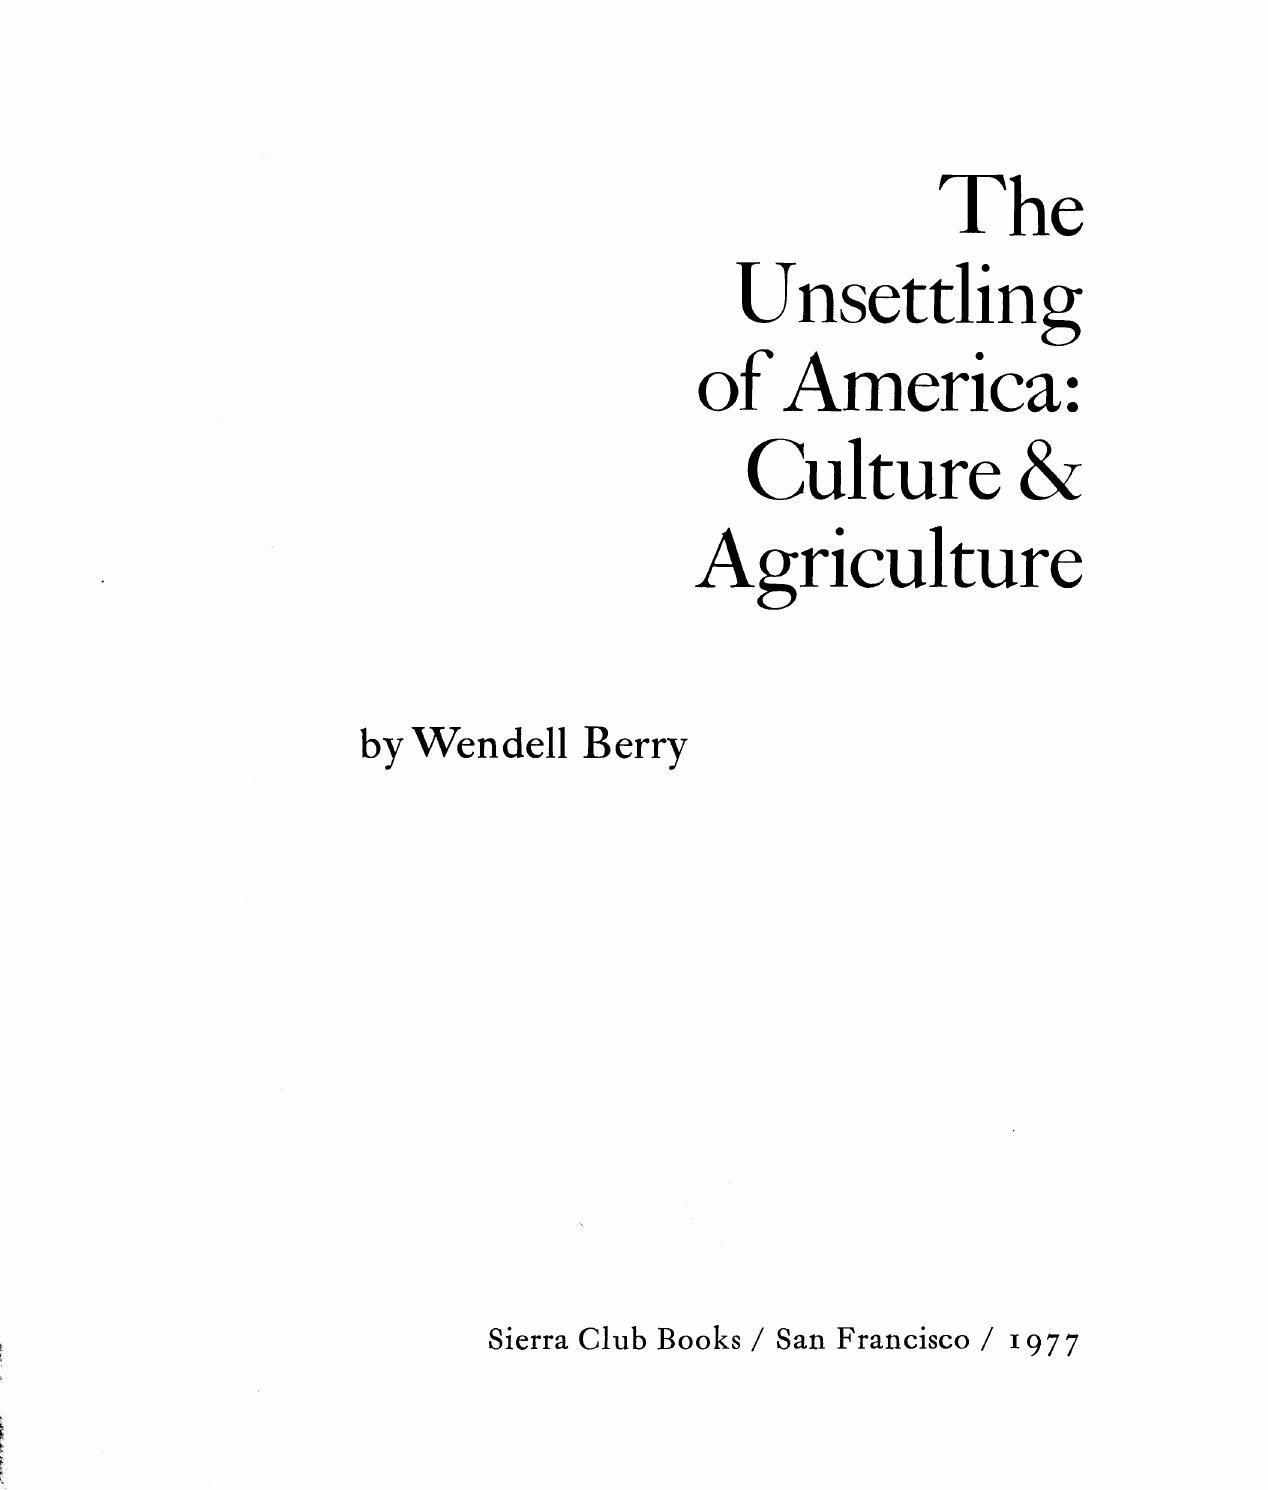 The Unsettling of America by Wendell Berry